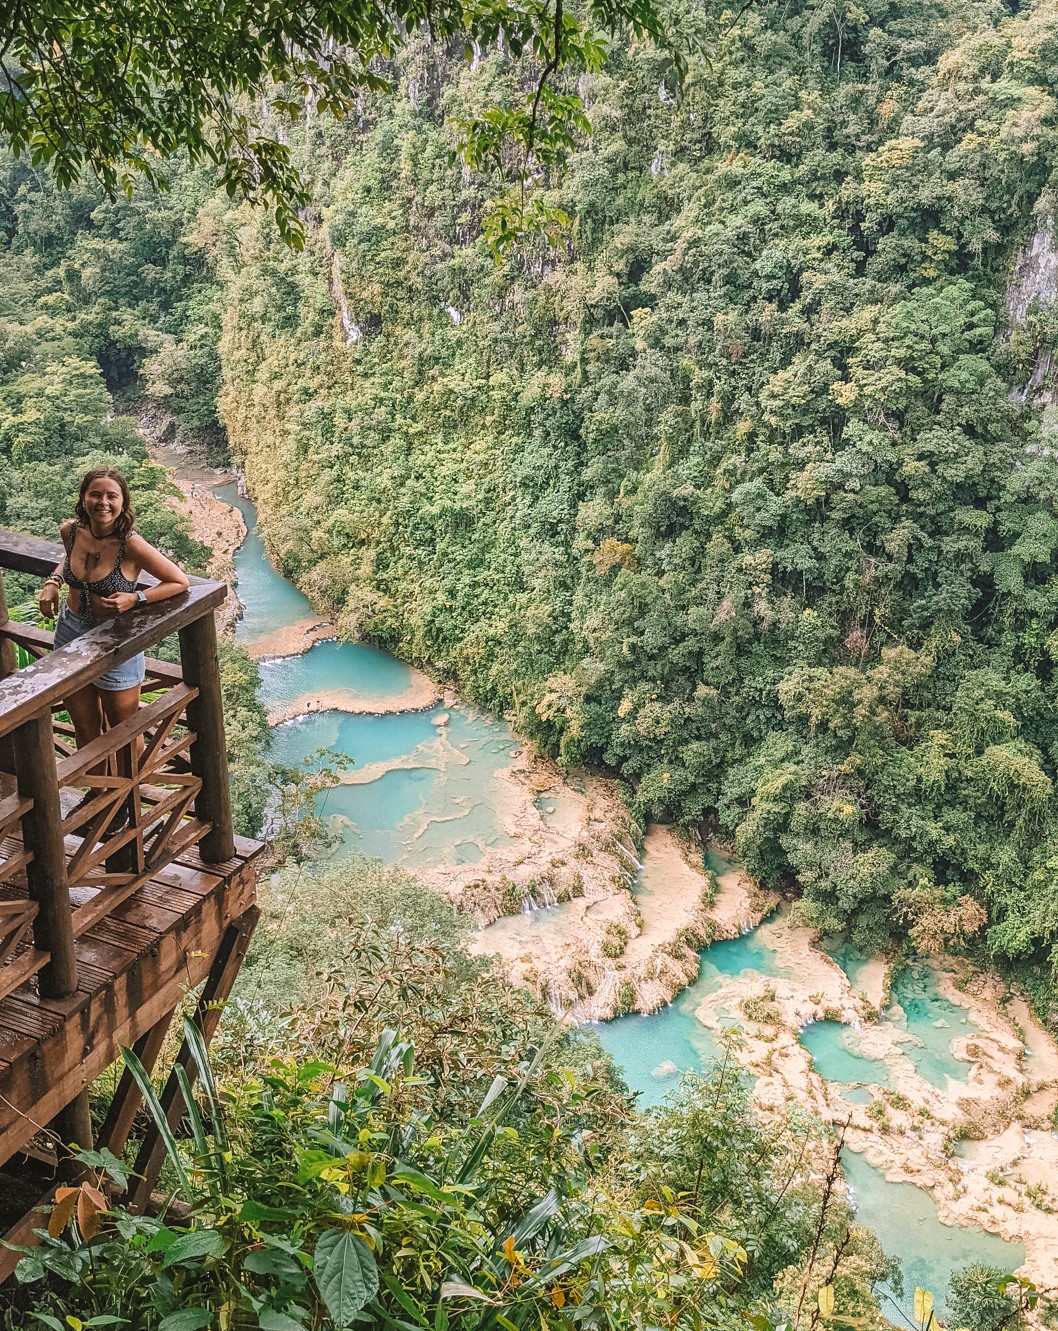 Reanna stood with the Semuc Champey pools behind her